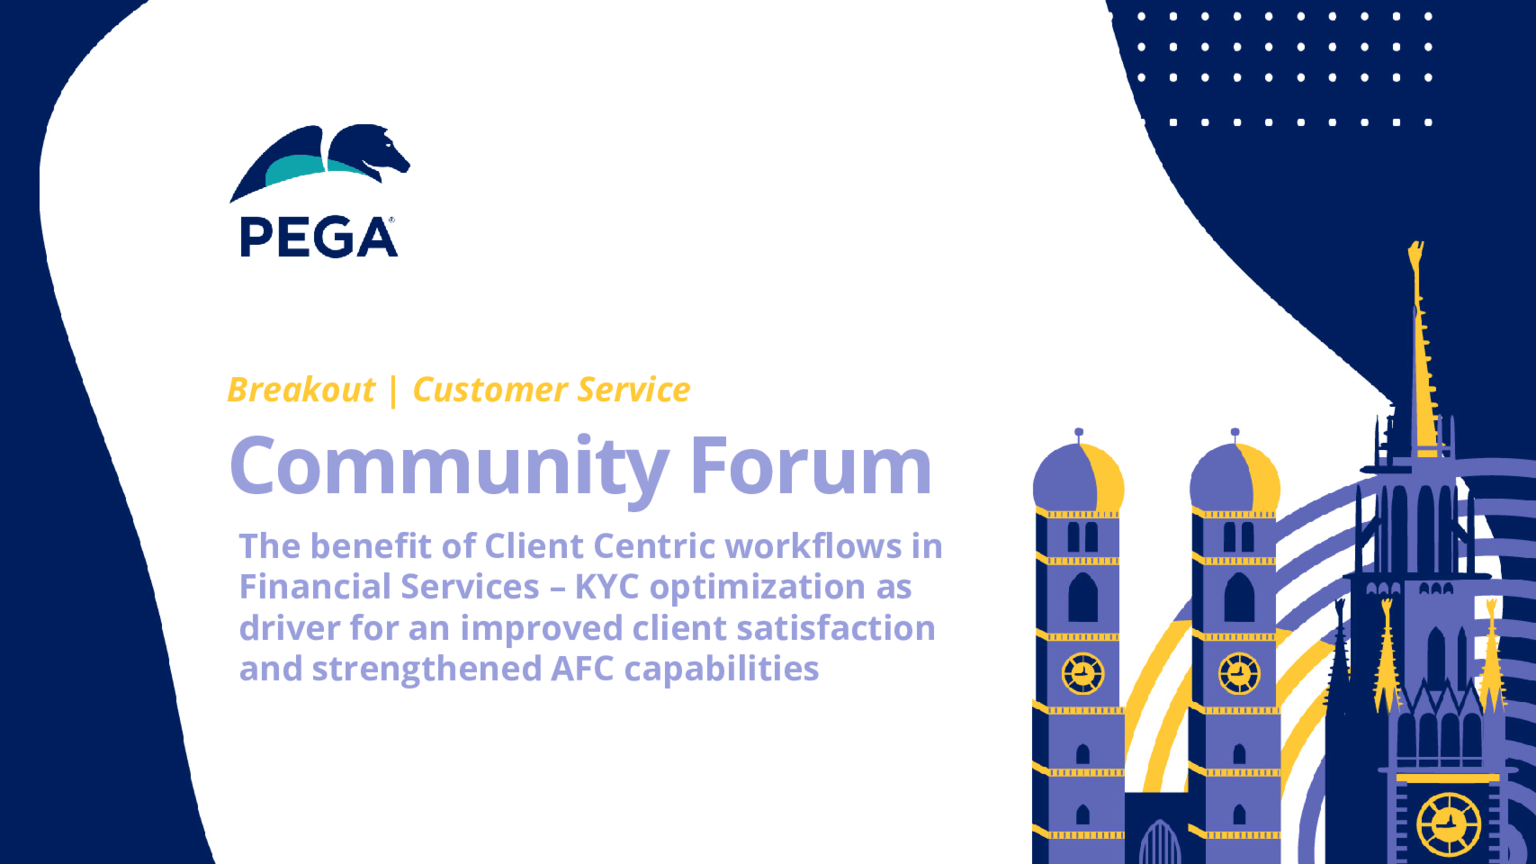 Pega Community Forum - EY Keynote: The benefit of Client Centric workflows in Financial Services (Presentation)